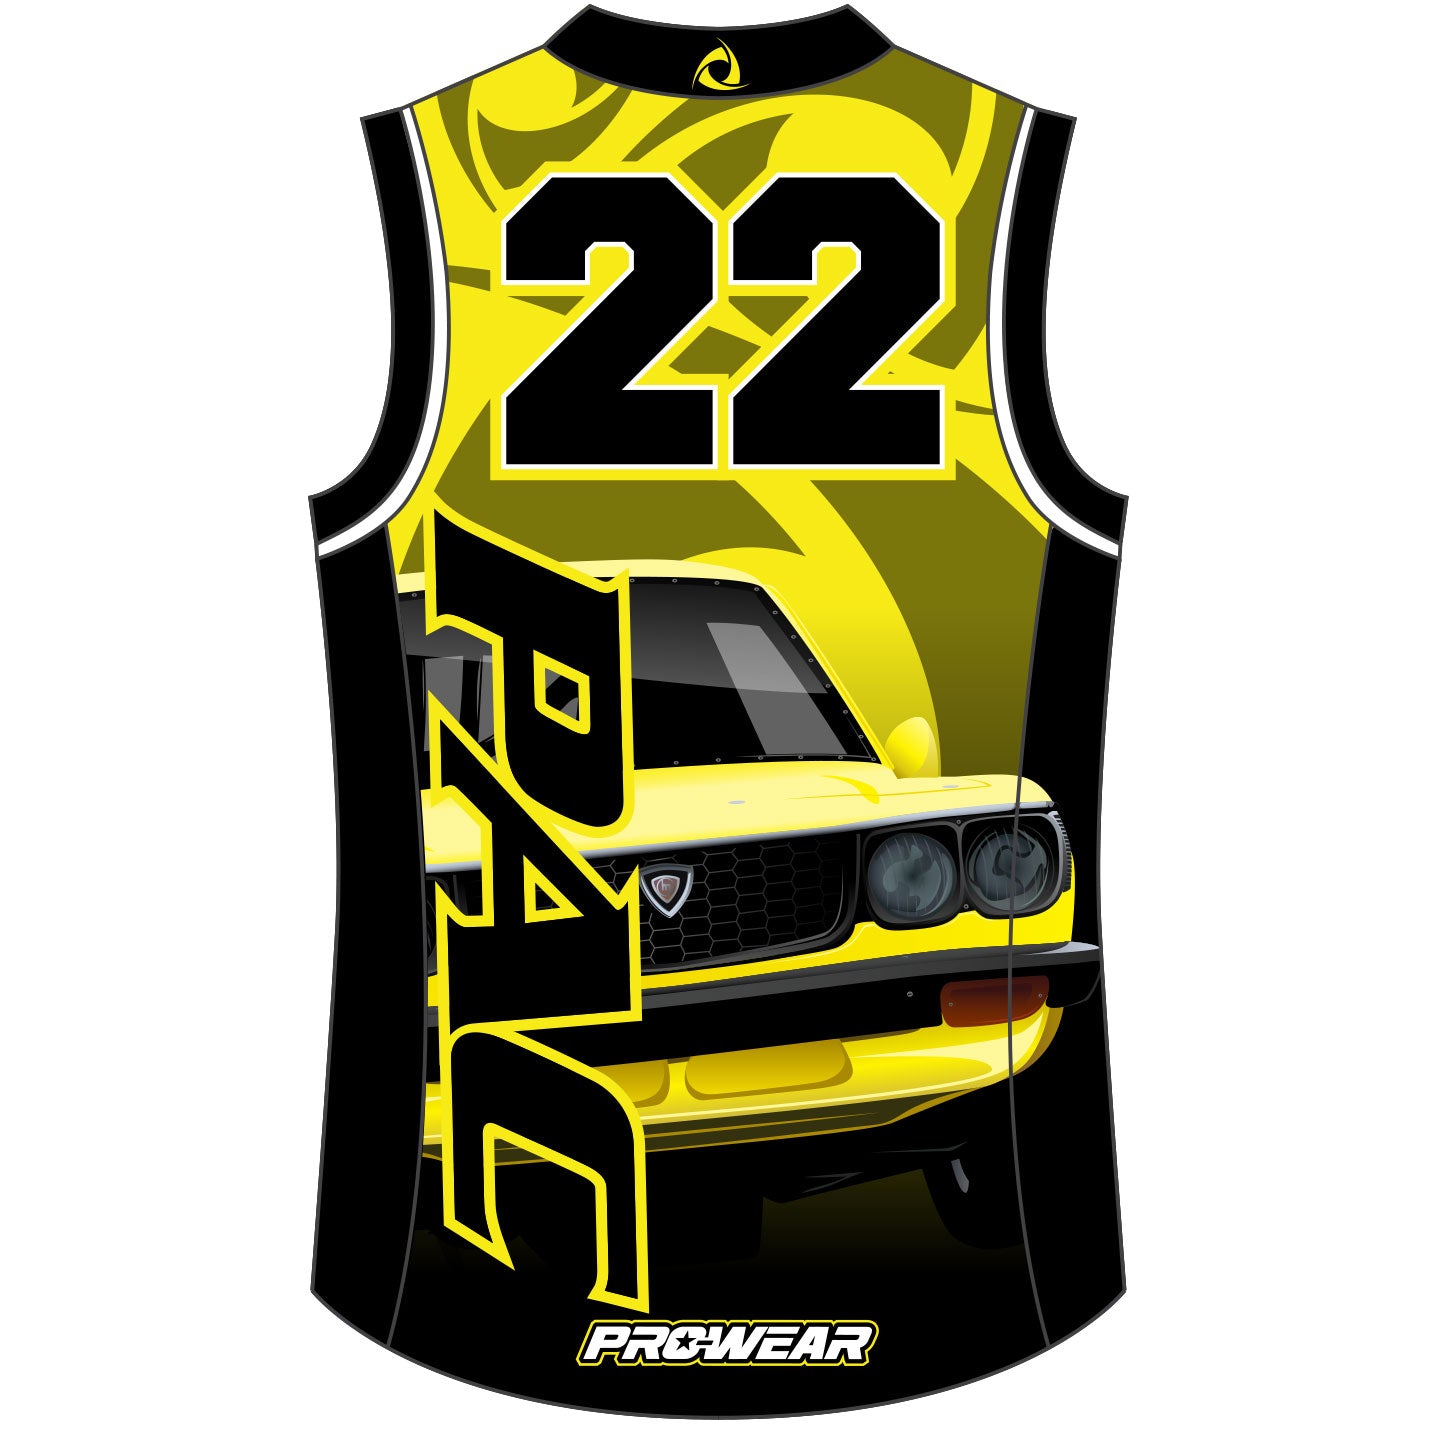 PAC Sublimated Singlets